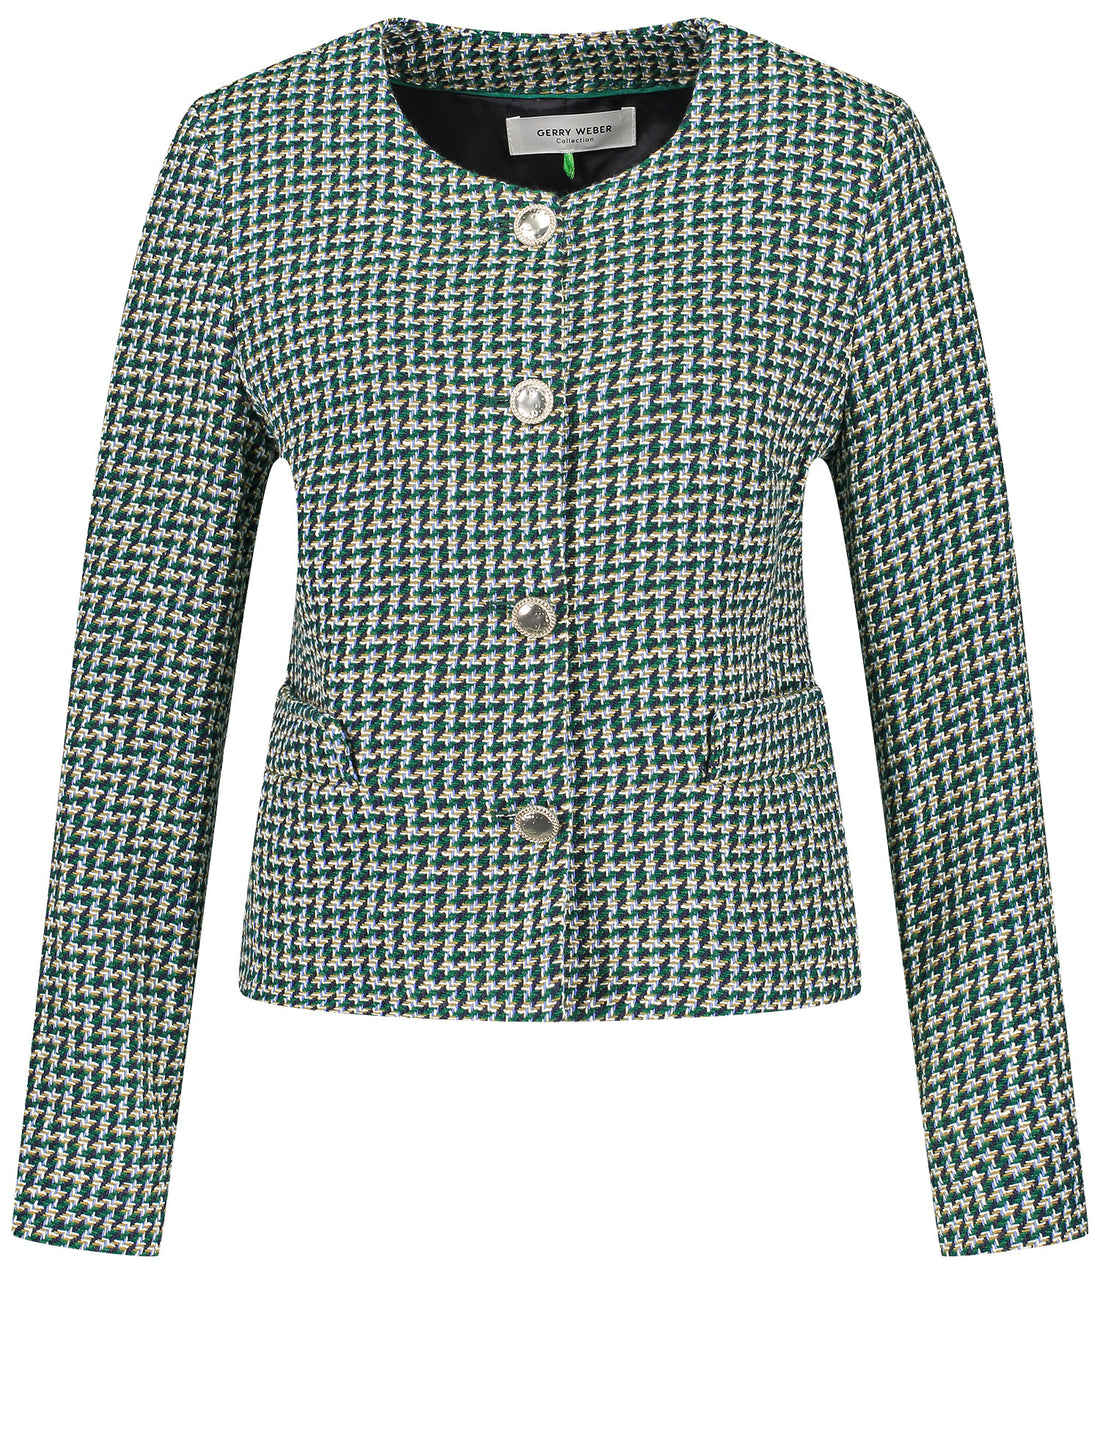 Blazer Jacket With A Houndstooth Pattern